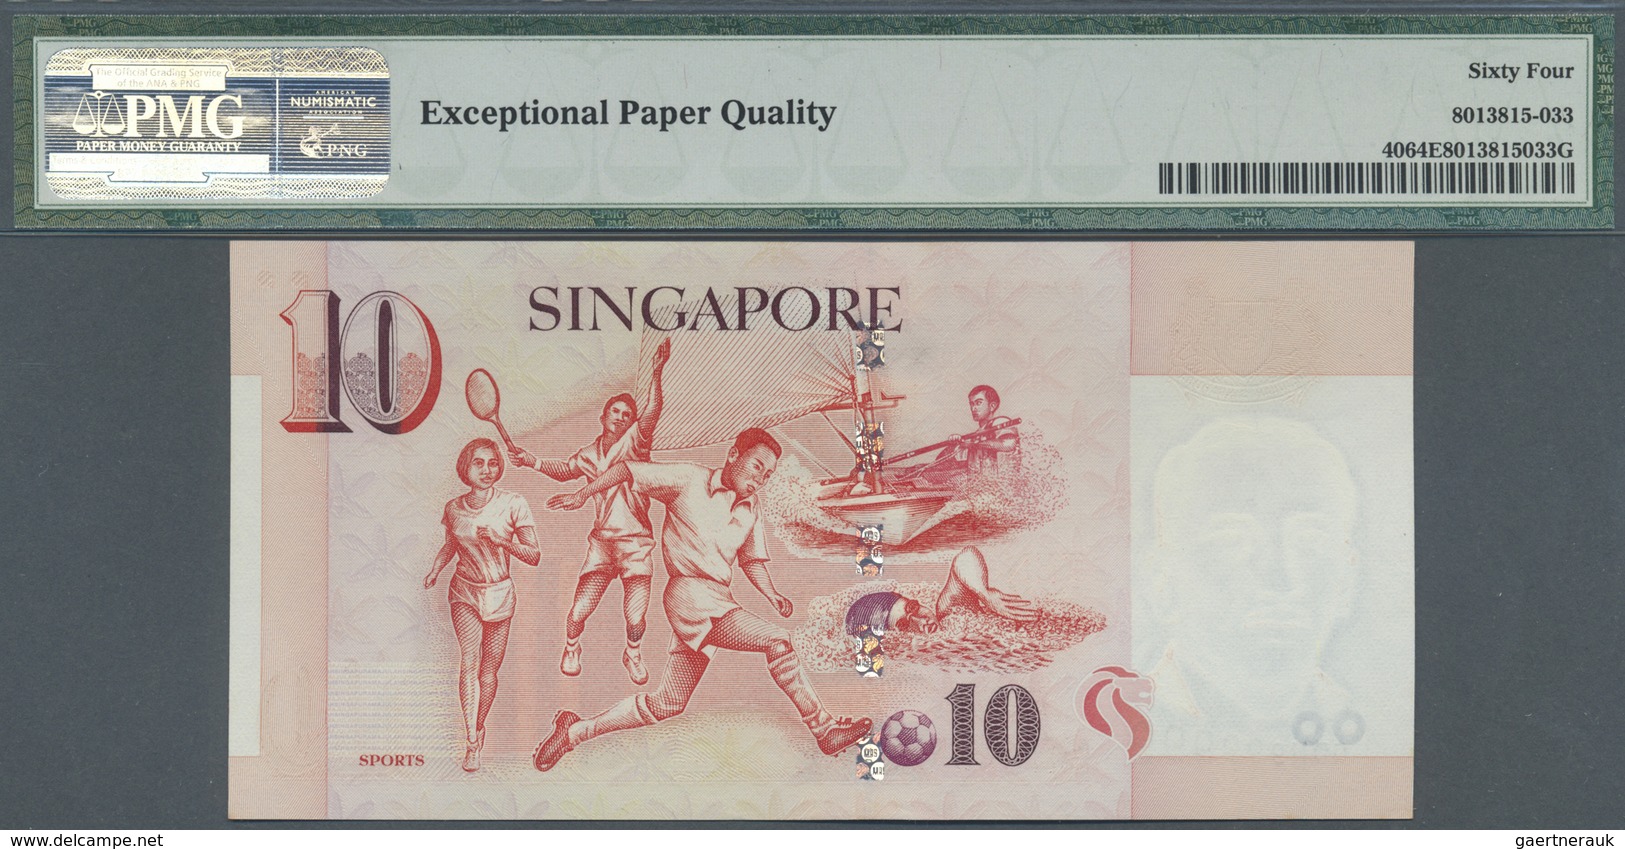 Singapore / Singapur: large and rare set of 10 pcs 10 Dollars ND(1999) P. 40, all with special numbe